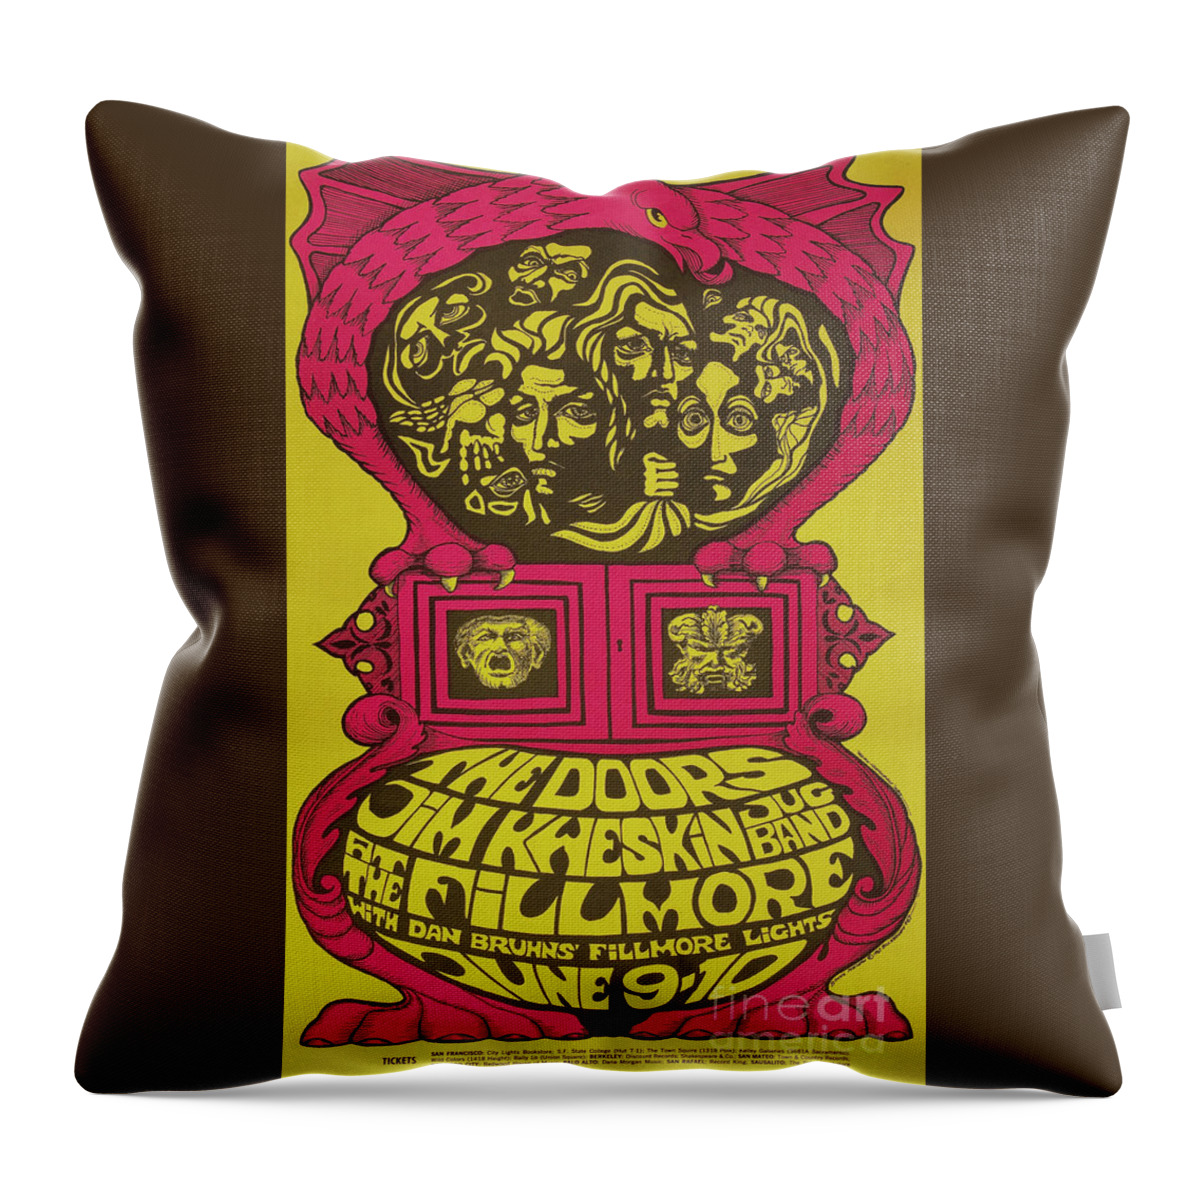 The Doors Throw Pillow featuring the photograph The Doors at the Fillmore by The Doors